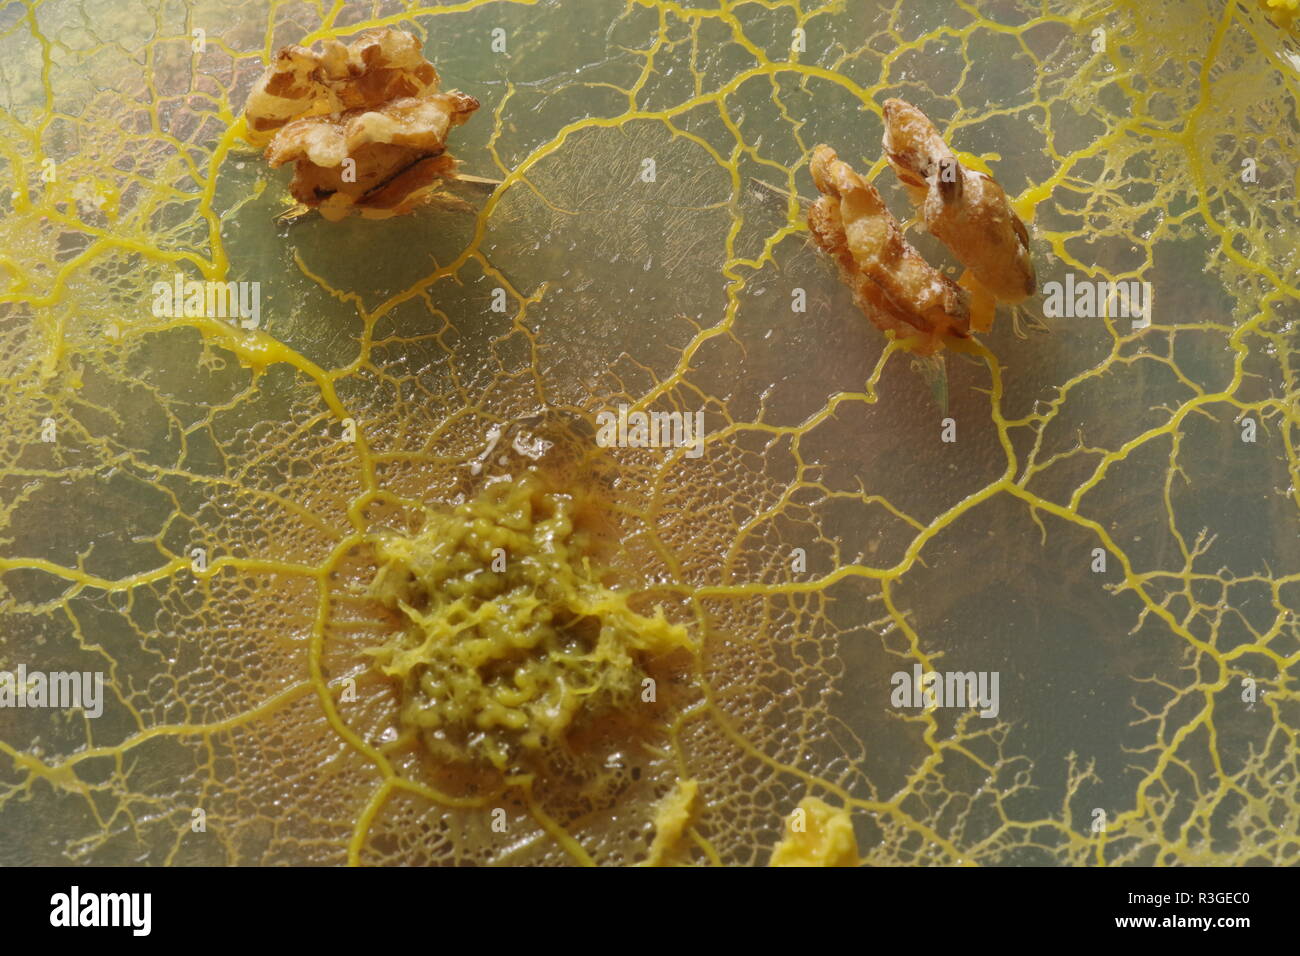 Yellow Slime Mould (Physarum polycephalum) Growing and Network Forming in Agar Petri Dis, Feeding on Oats. Biology Laboratory Project, Scotland, UK. Stock Photo